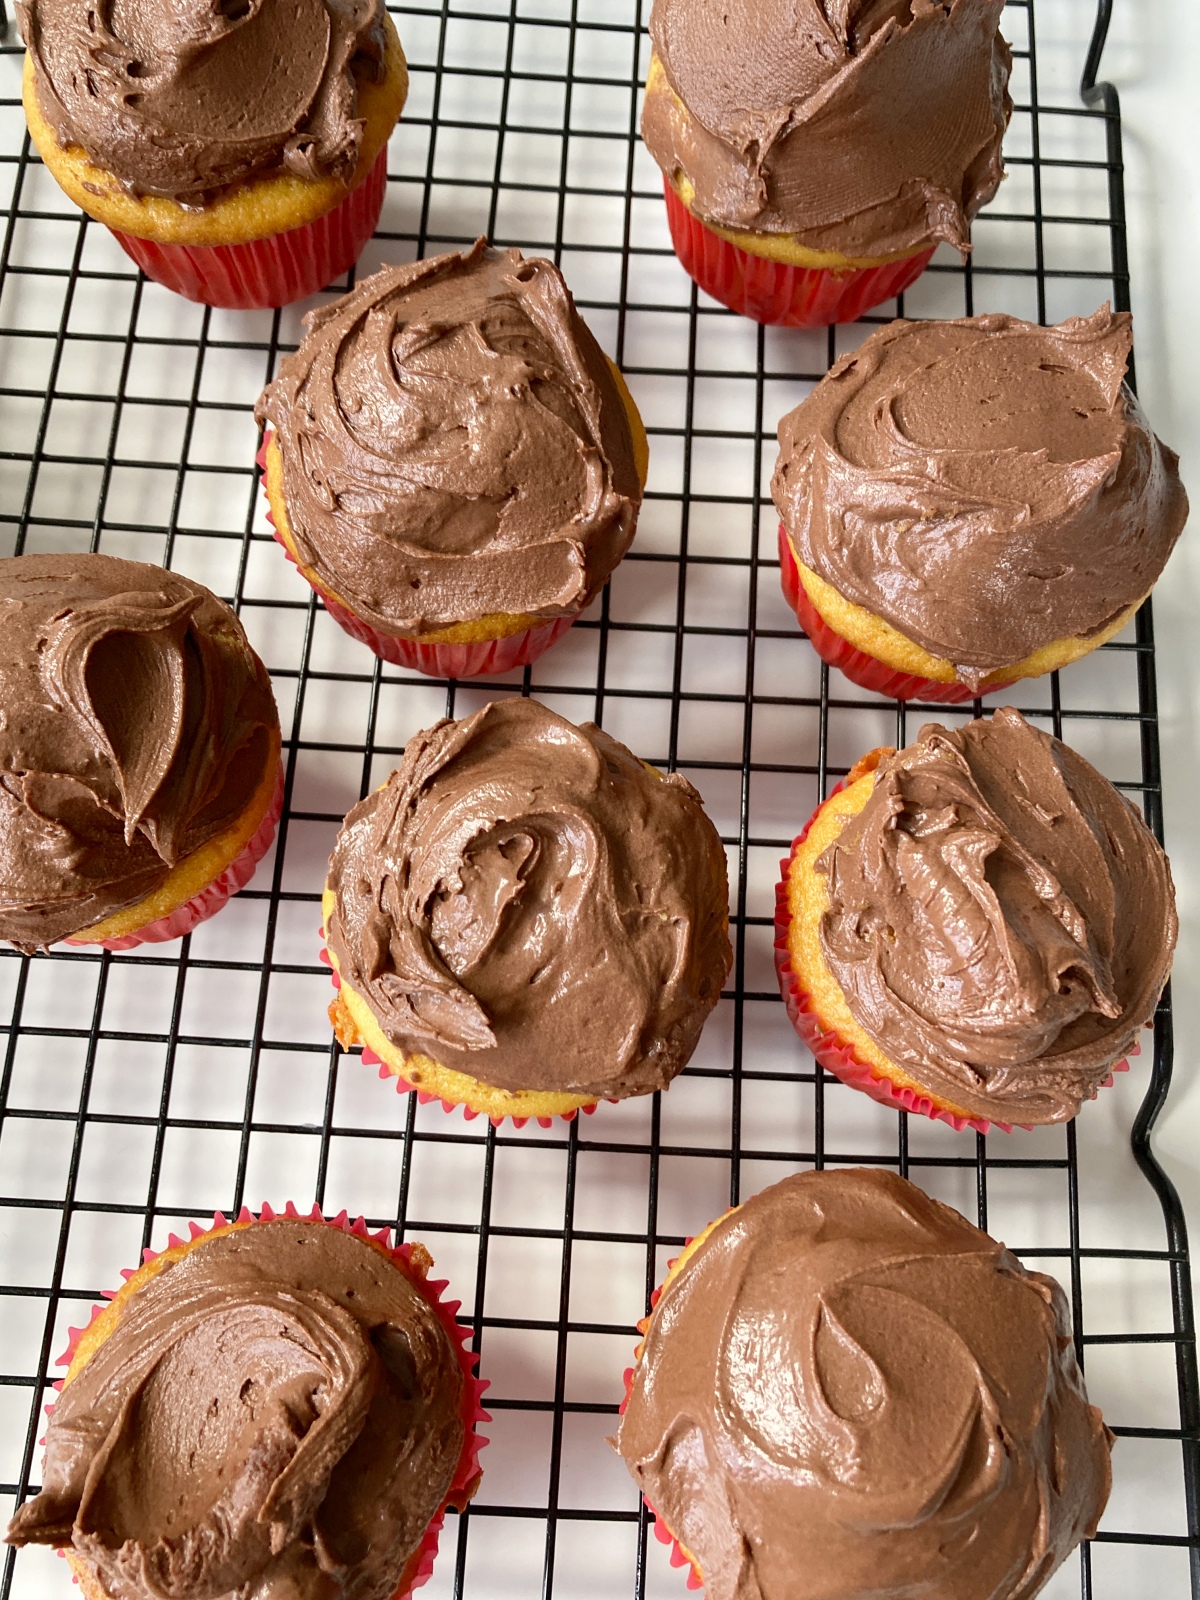 Sour Cream Chocolate Frosting